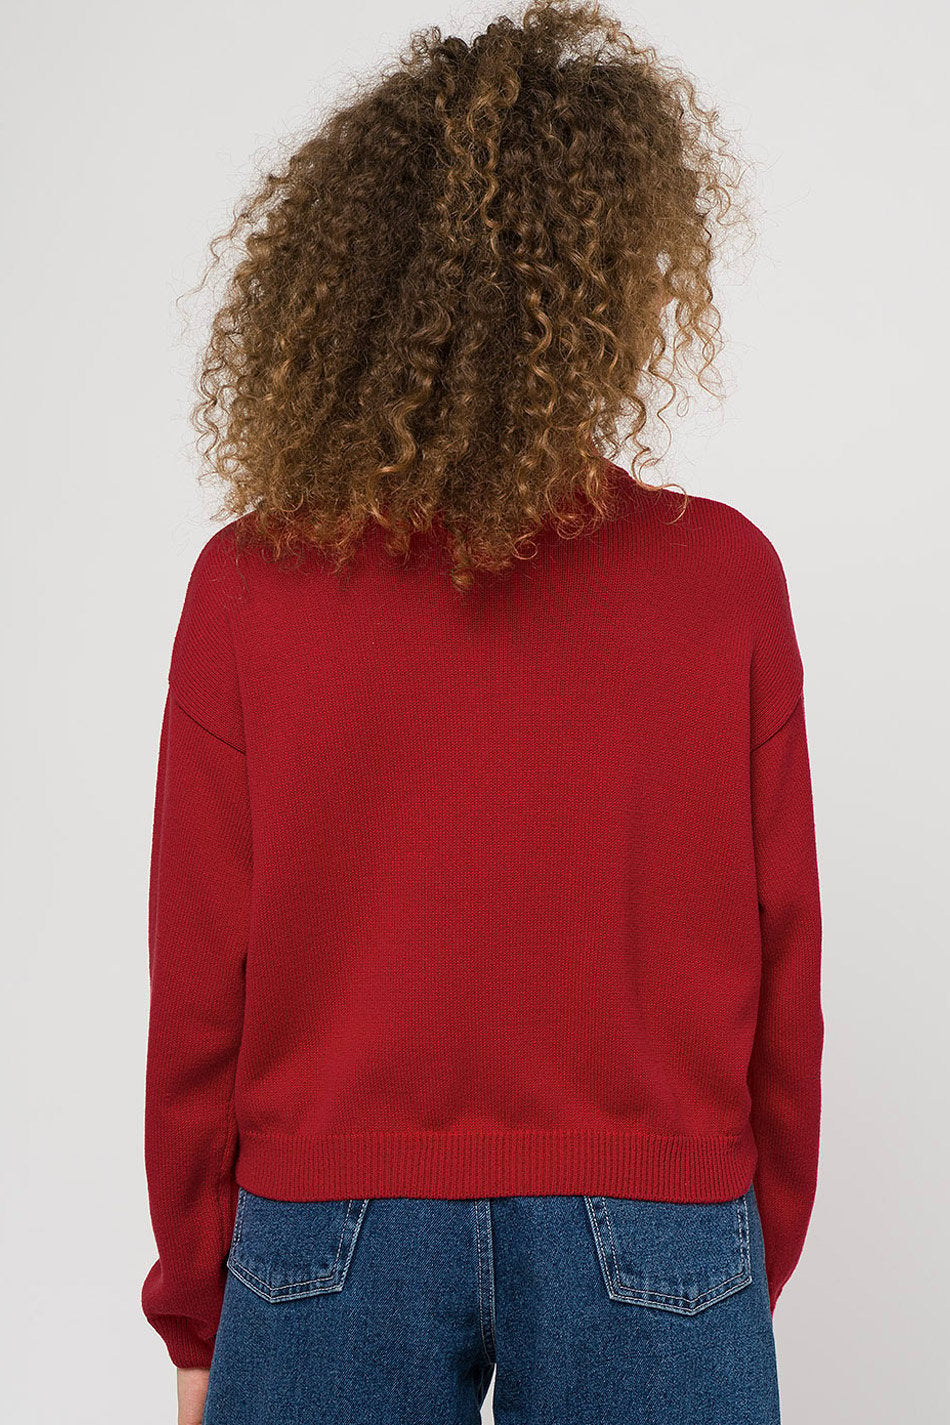 Perkins Kaotiko red knitted sweater